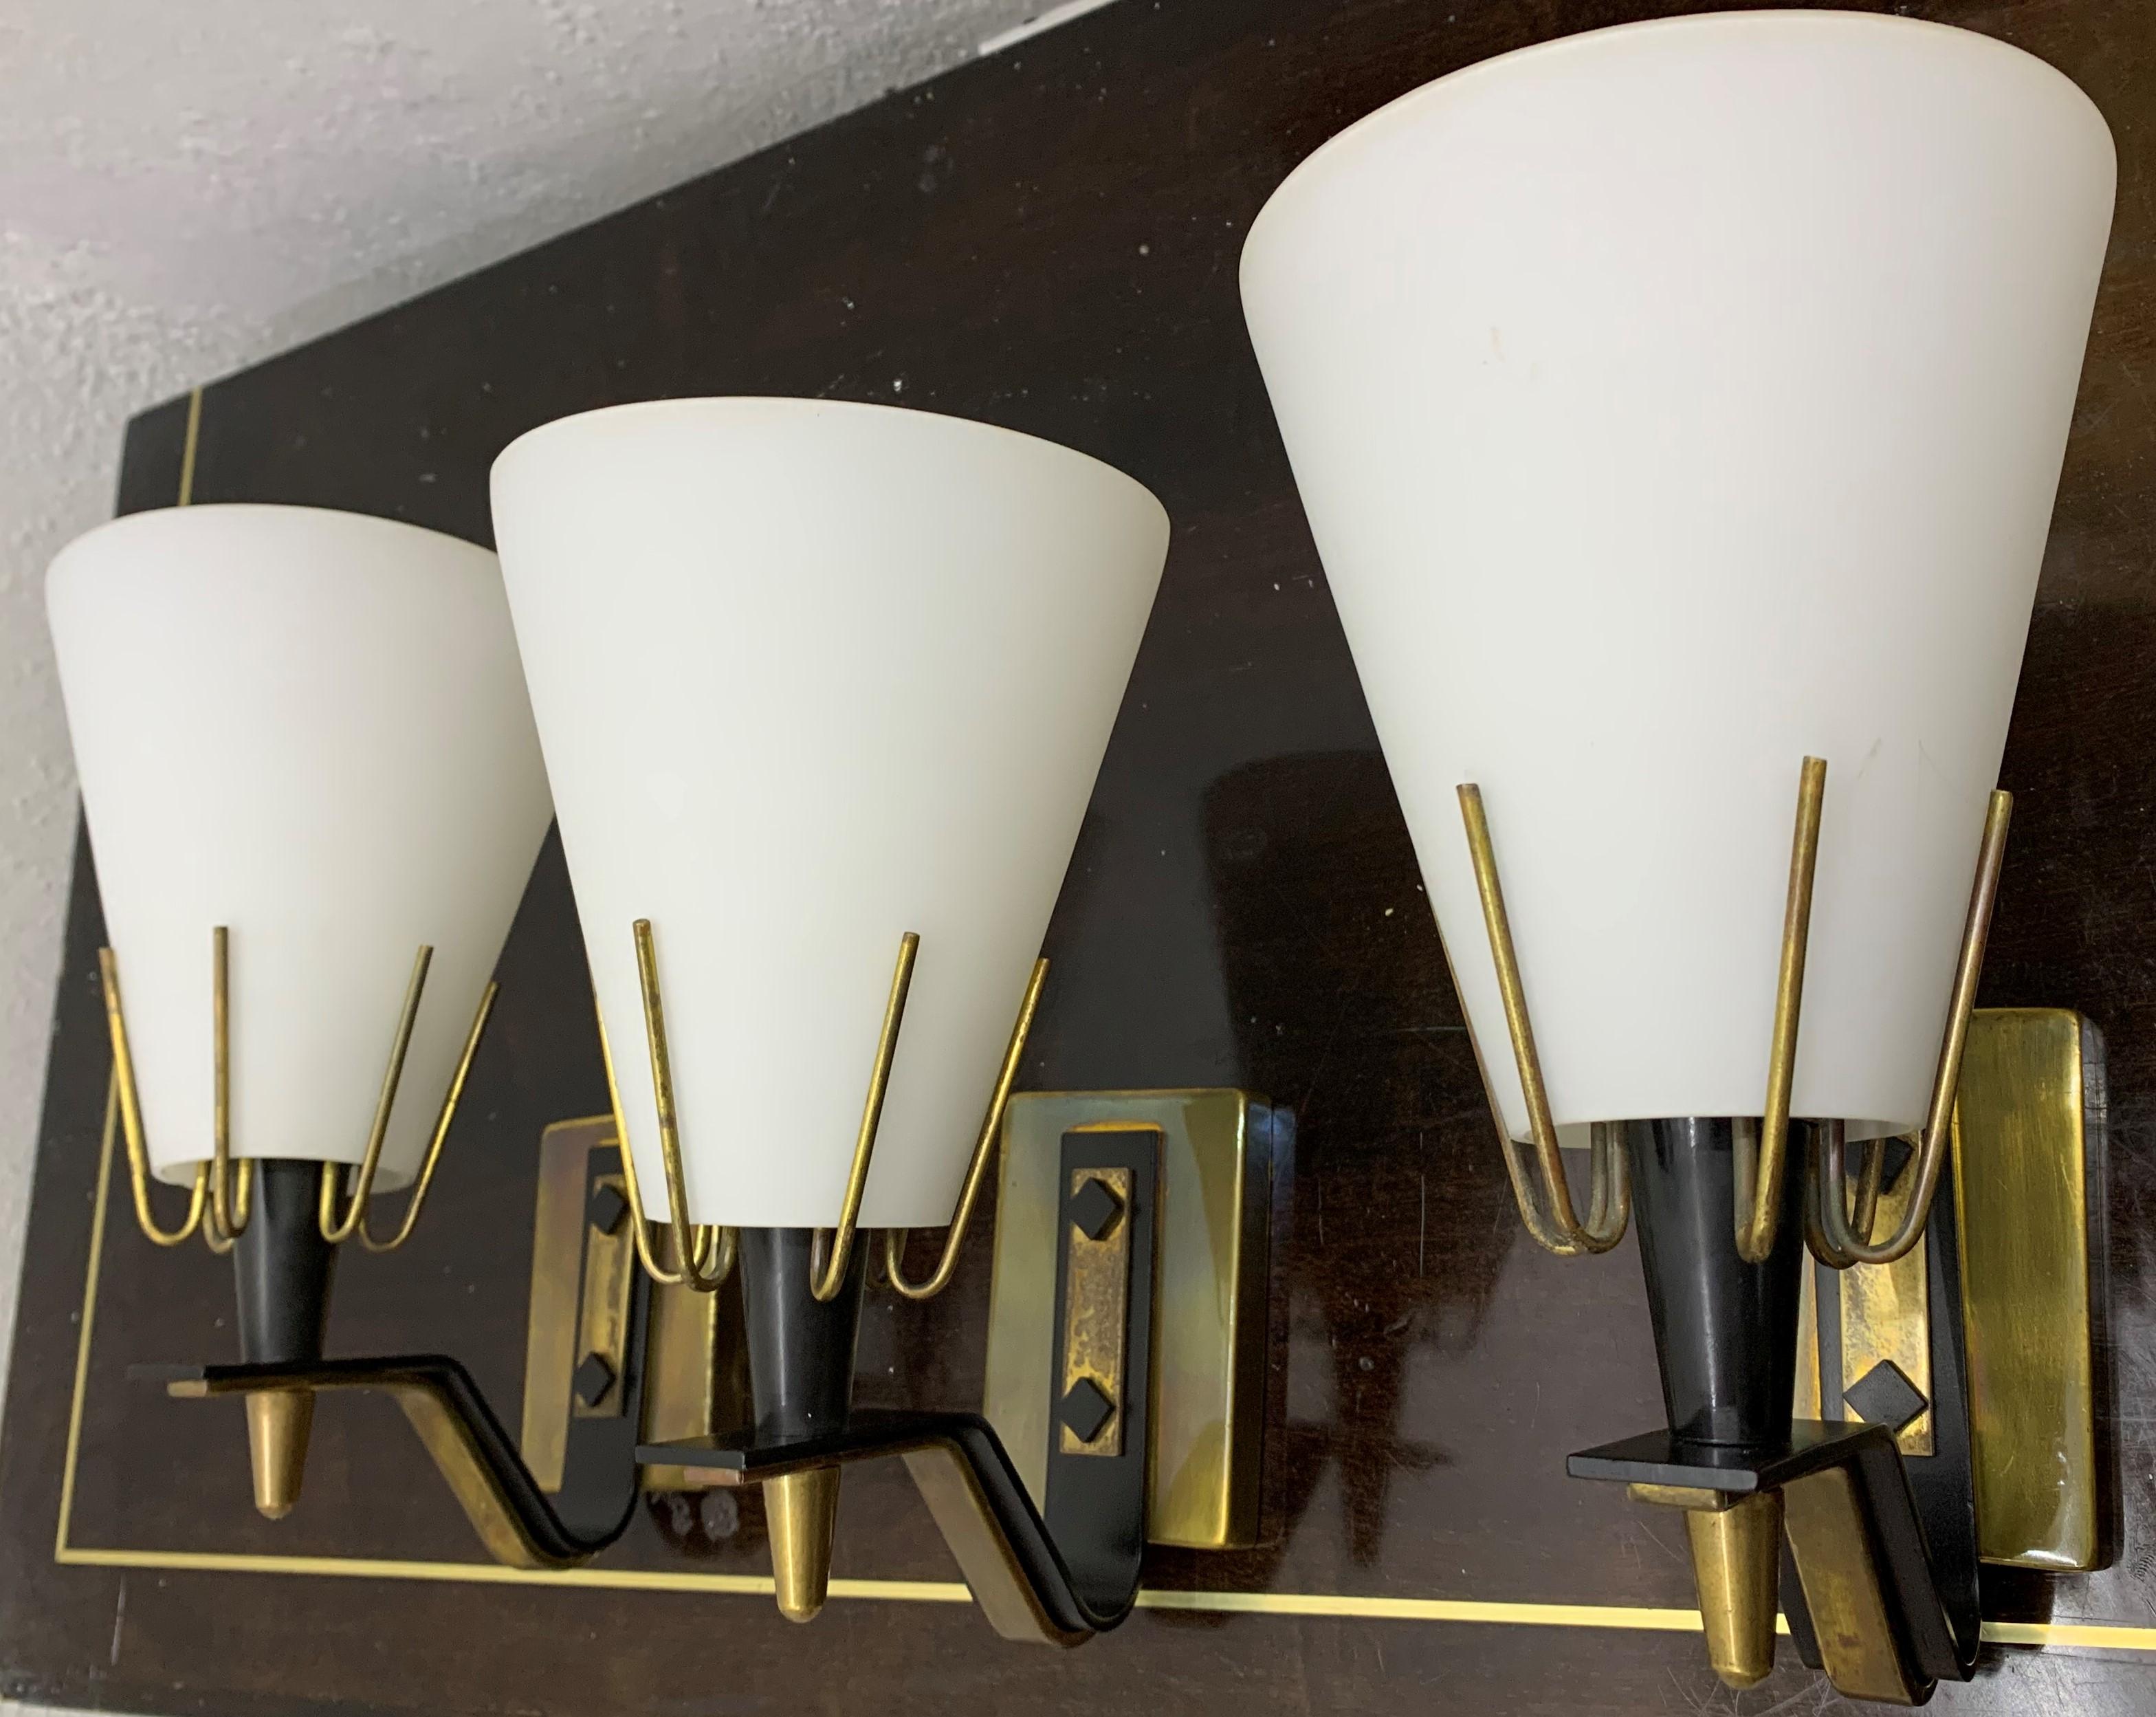 One left at the moment 
Mid-Century Modern sconce attributed to Stilnovo, Italy, circa 1950
Materials:
Opaline glass
Brass
Lacquered metal

Priced individually.